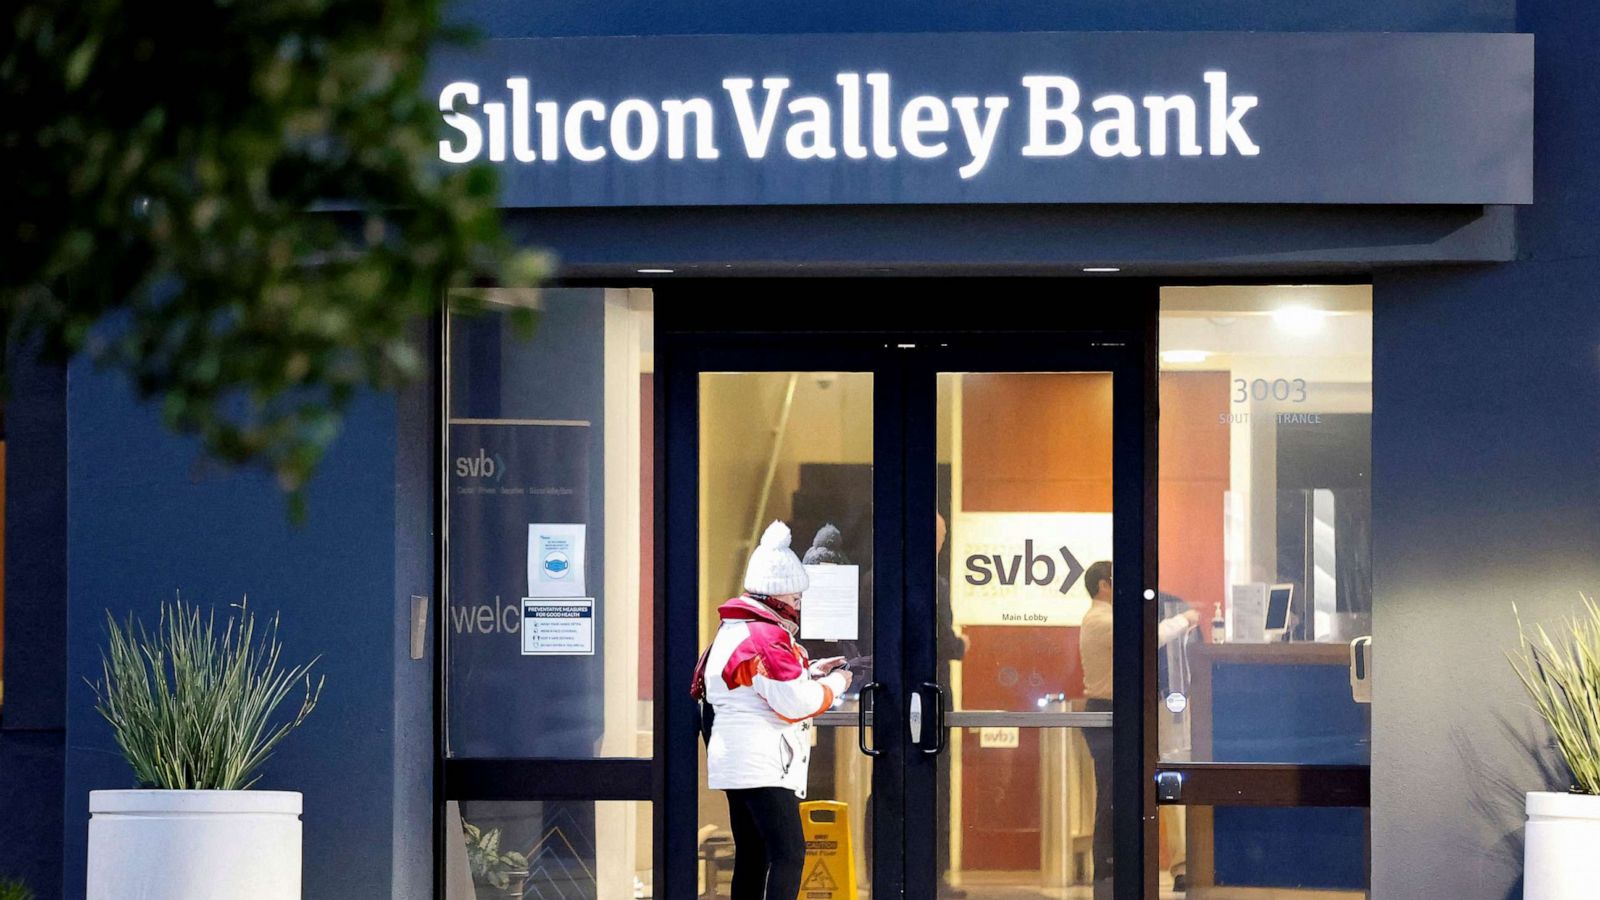 Silicone Valley Bank: A financial disaster waiting to happen